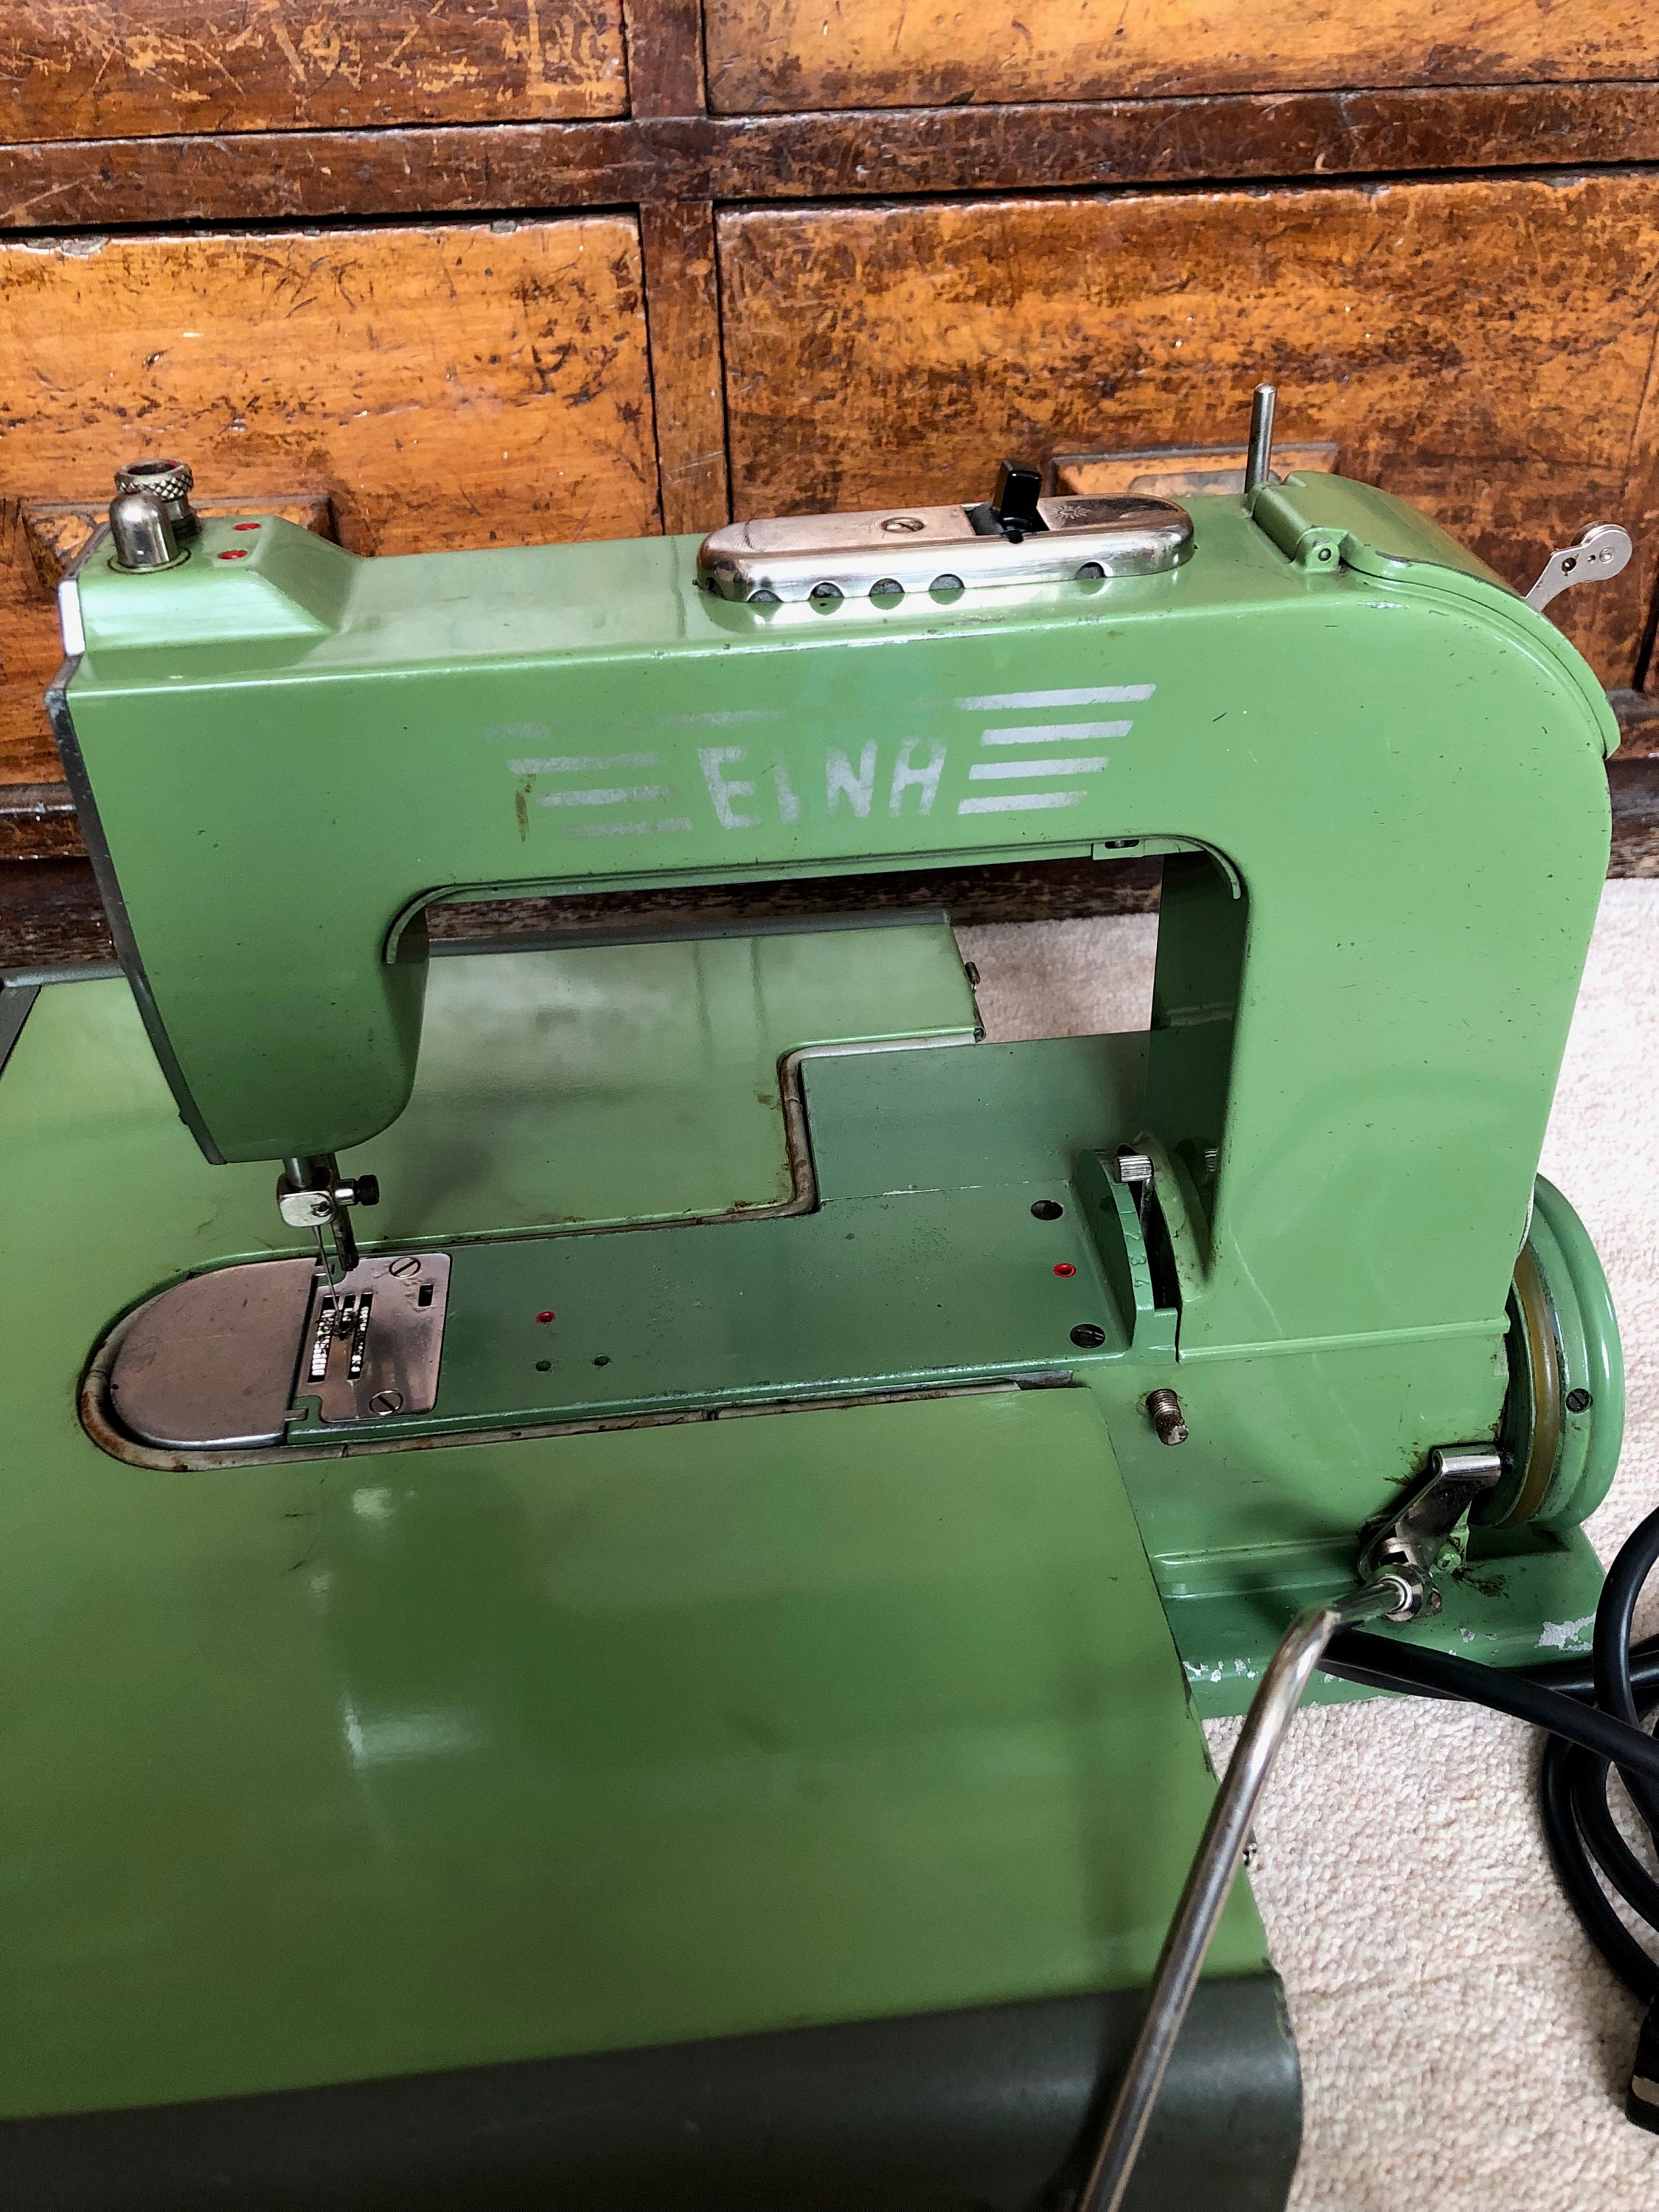 2 VINTAGE ELNA GRASSHOPPER Sewing Machines 1 Working 1 Not PICK UP ONLY